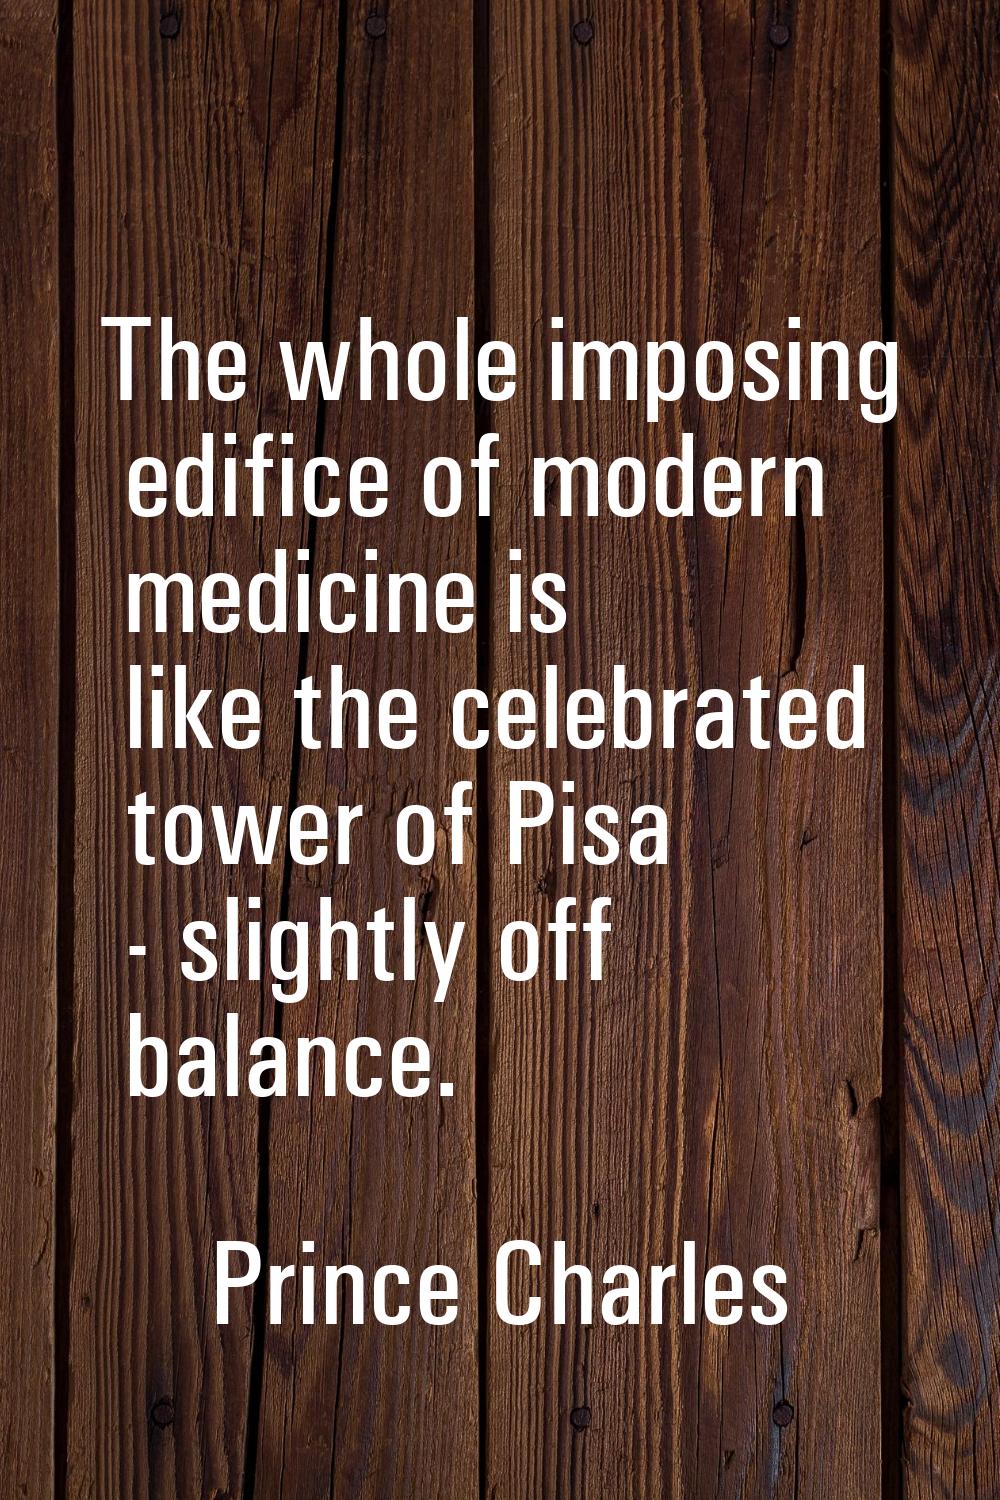 The whole imposing edifice of modern medicine is like the celebrated tower of Pisa - slightly off b